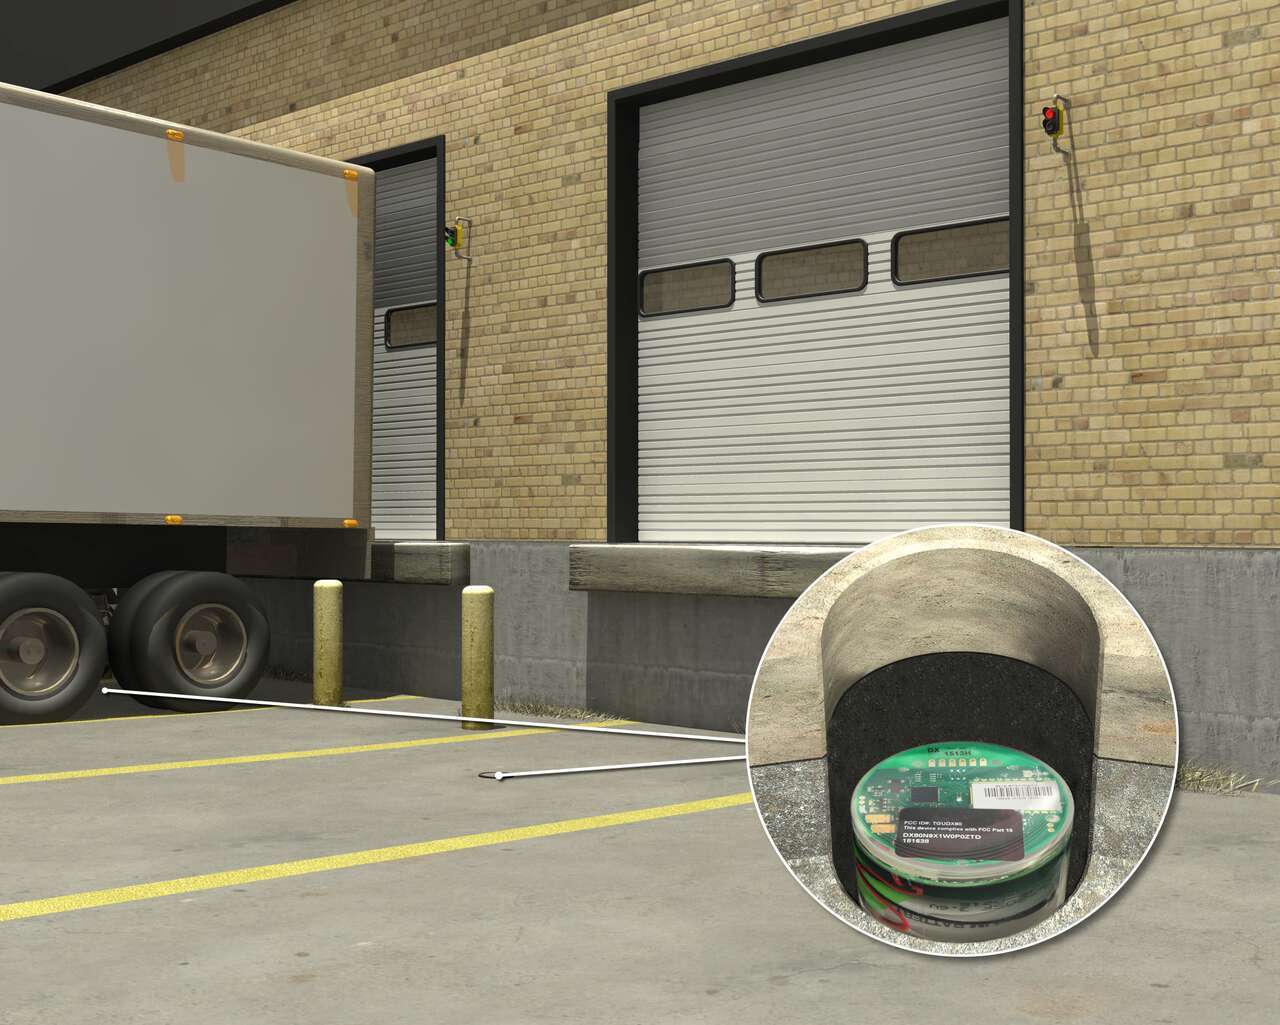 Loading Dock and Mobile Pick-Up Solution Guide